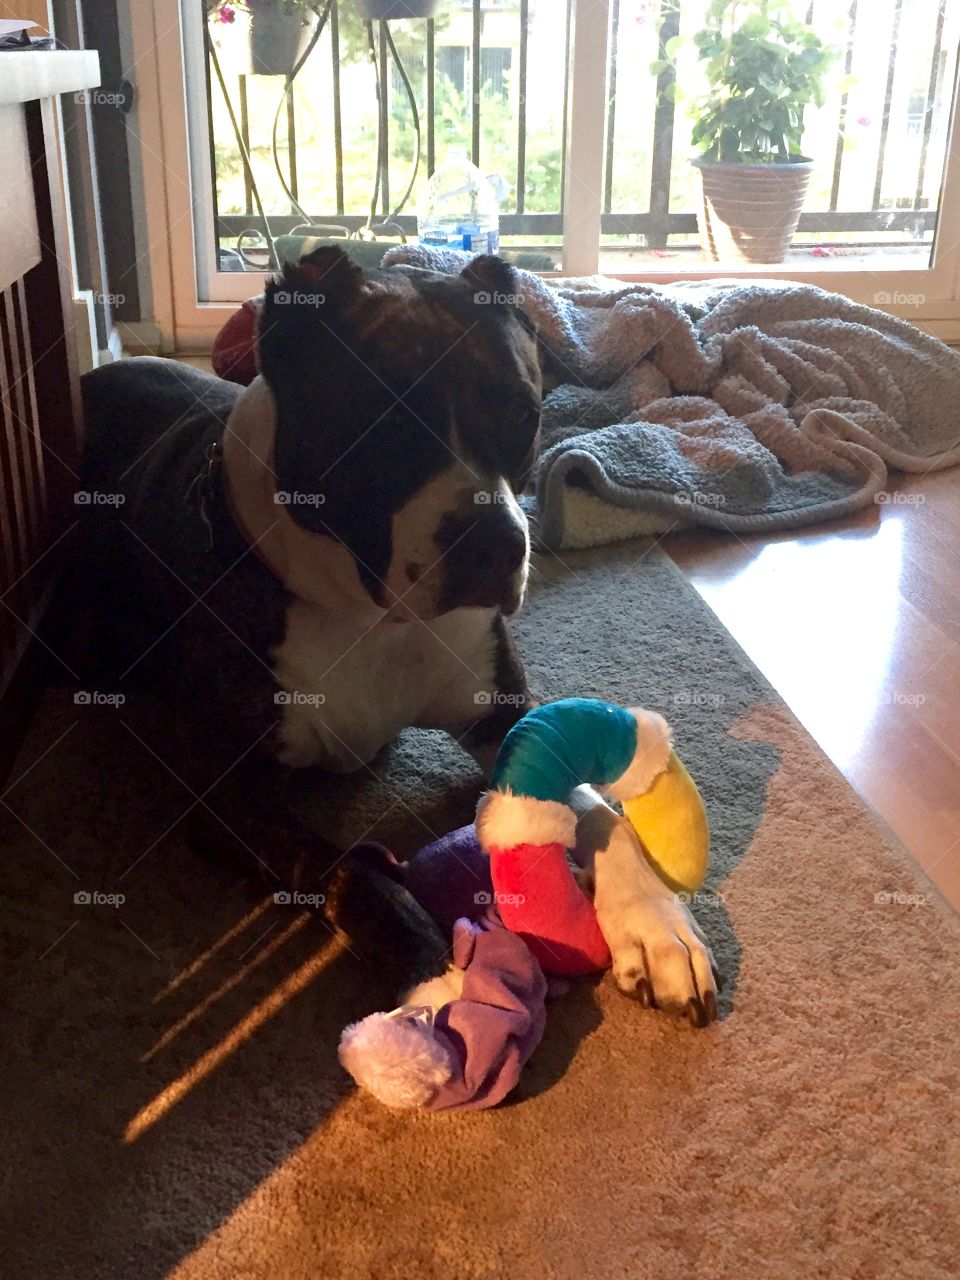 Sally says "don't even think about taking my toys".   